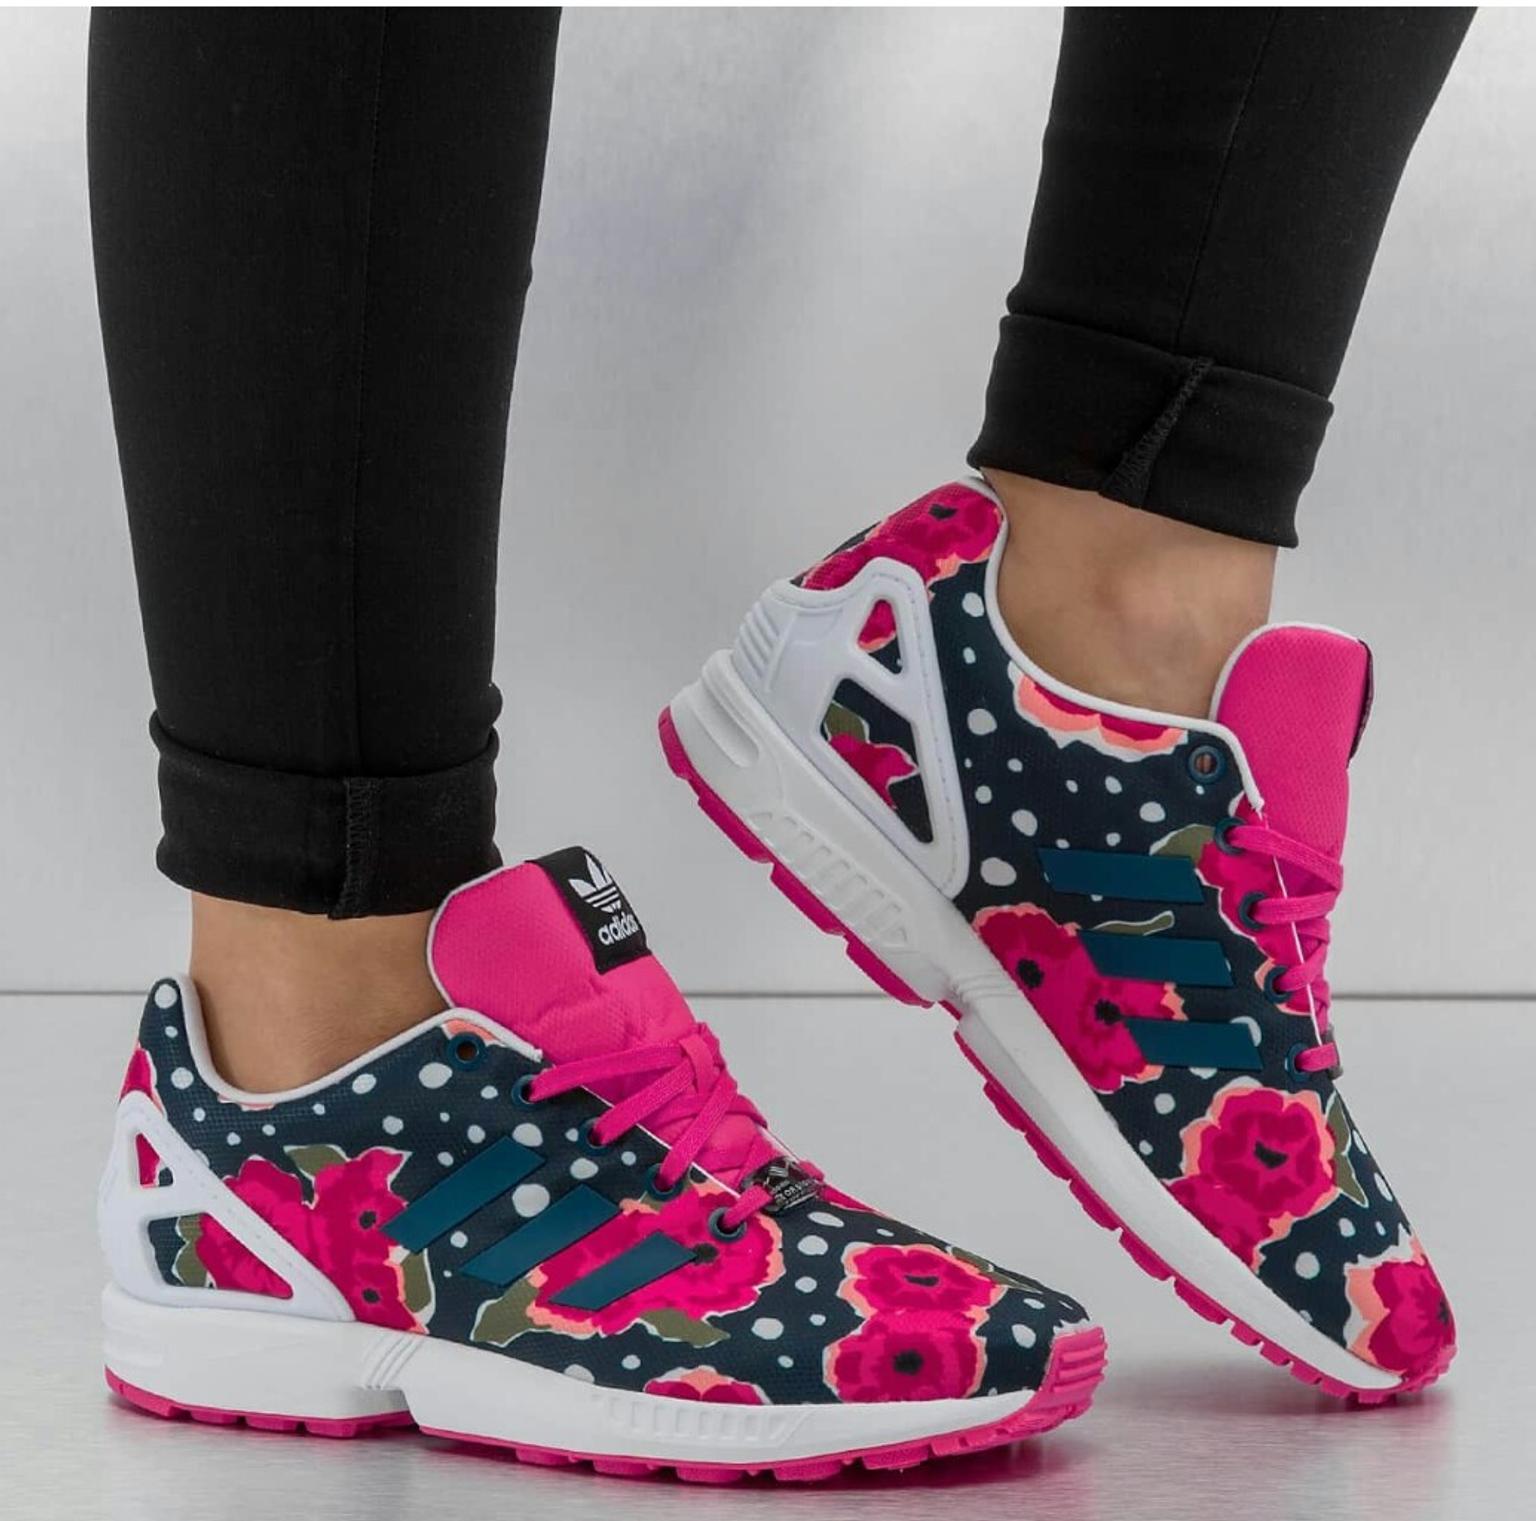 adidas zx womens trainers